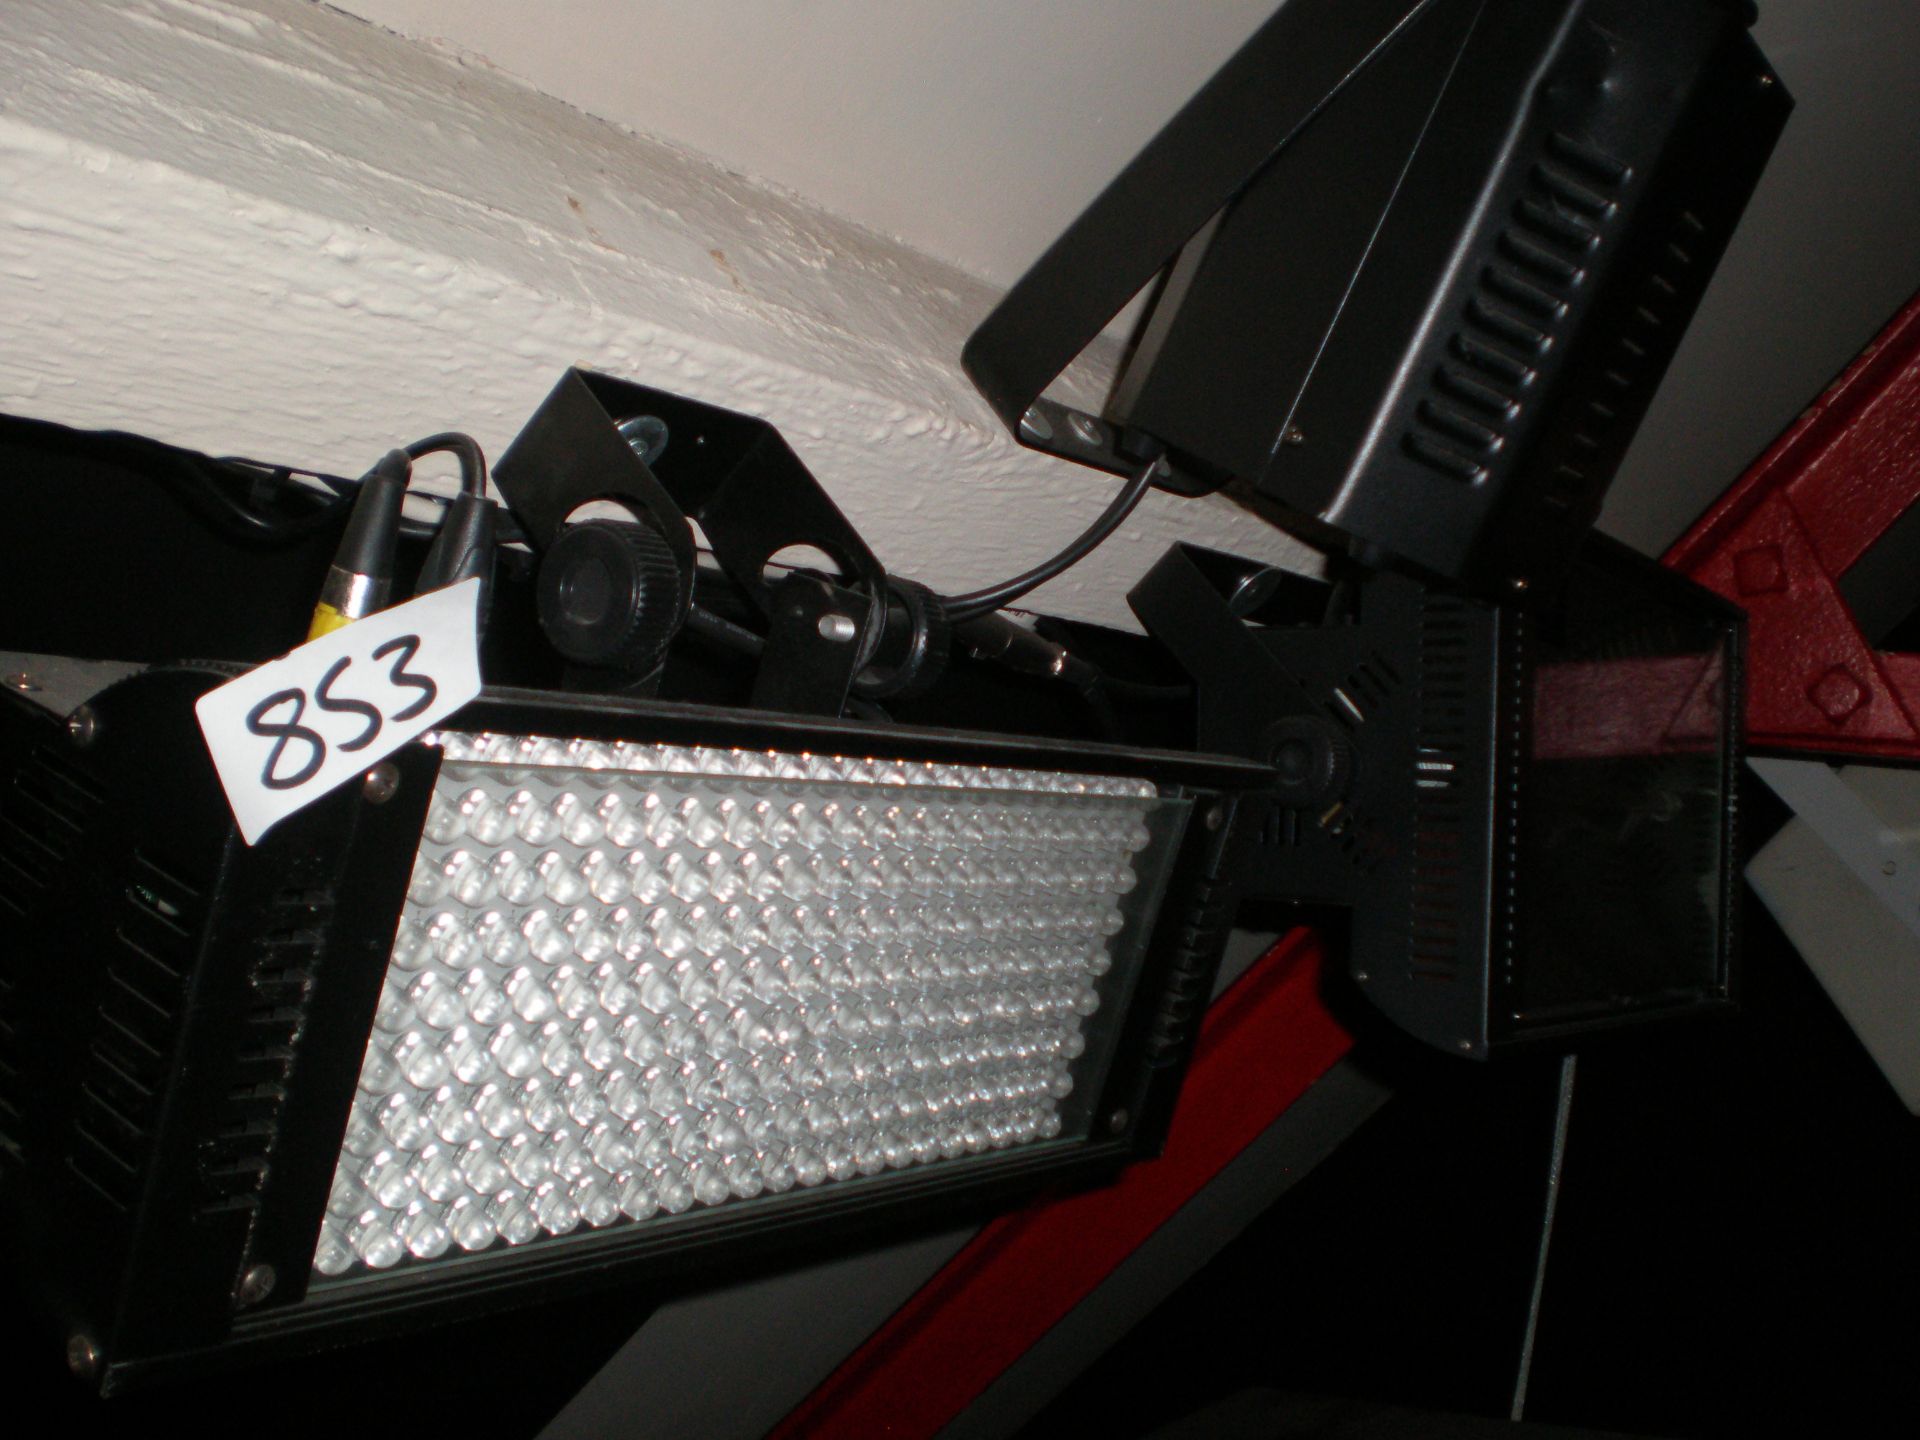 Rgb Colour Strobe Light /Blinder Dmx Or Master Slave Or Stand Alone Operation, Comes Wih Mounting - Image 2 of 3